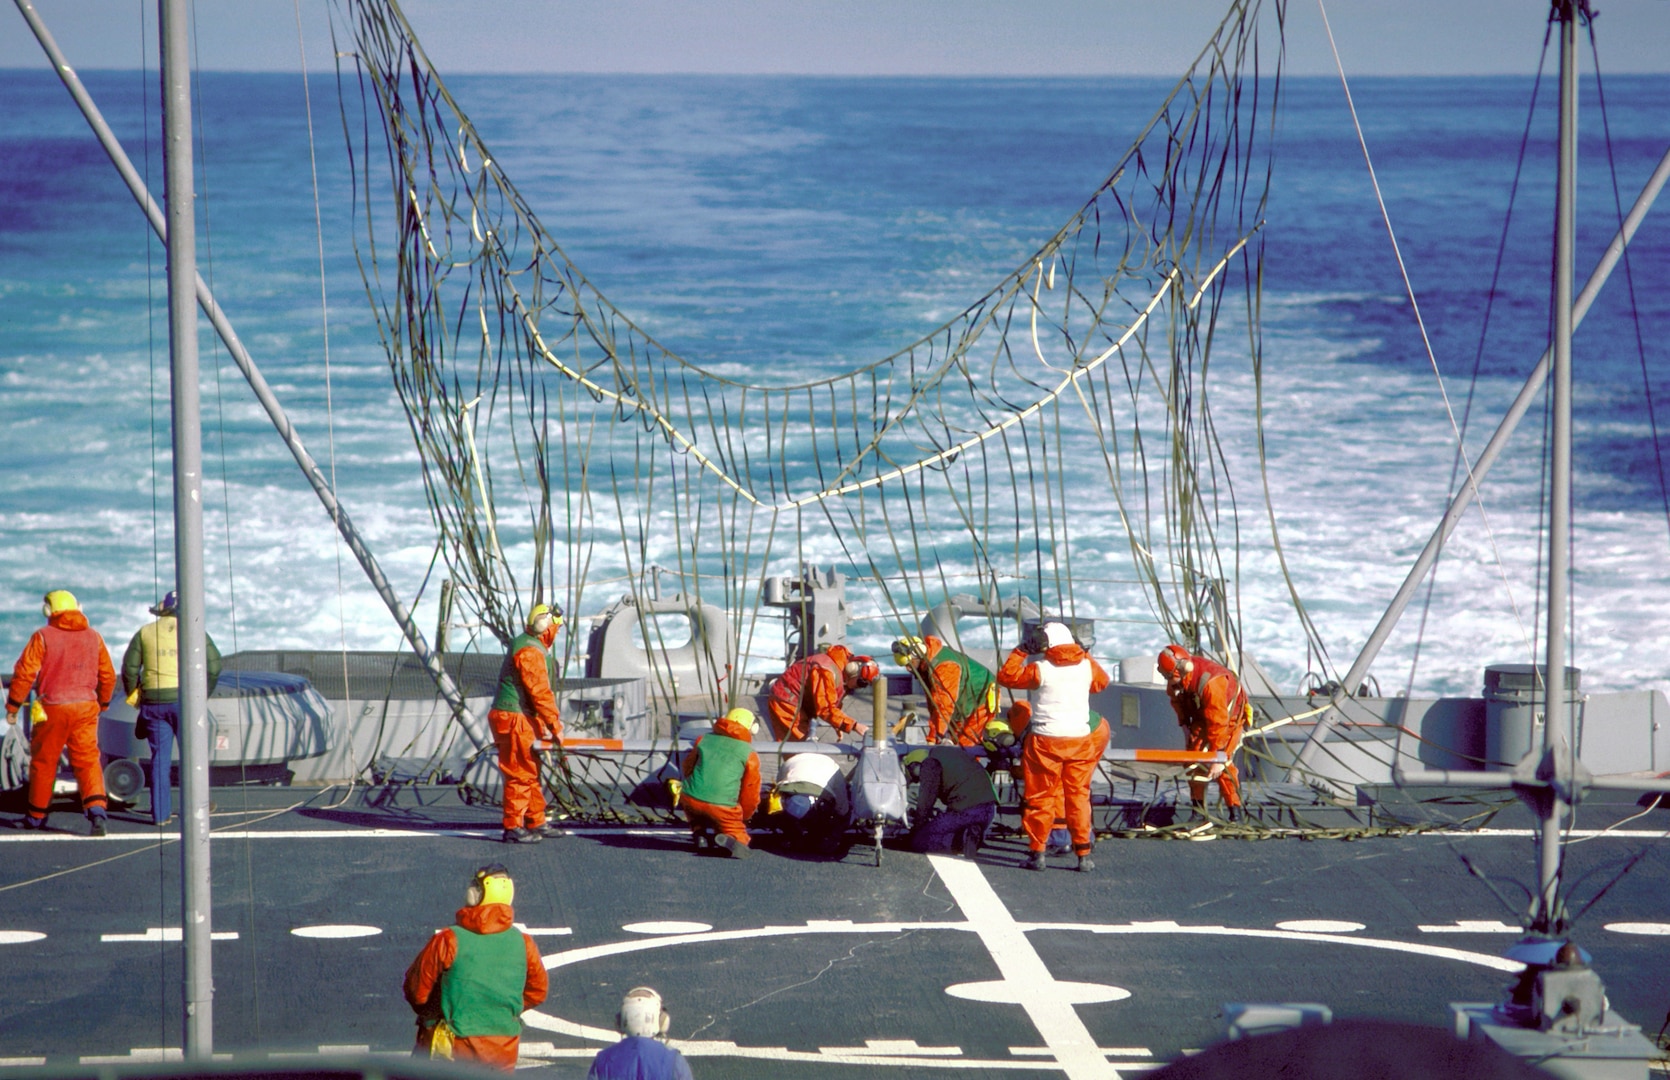 Crewmen disengage a Pioneer I remotely-piloted vehicle (RPV) from a recovery net erected on the stern of the battleship USS IOWA (BB-61) on 1 Nov 1986 (Photo by: PHC Jeff Hilton, USN)